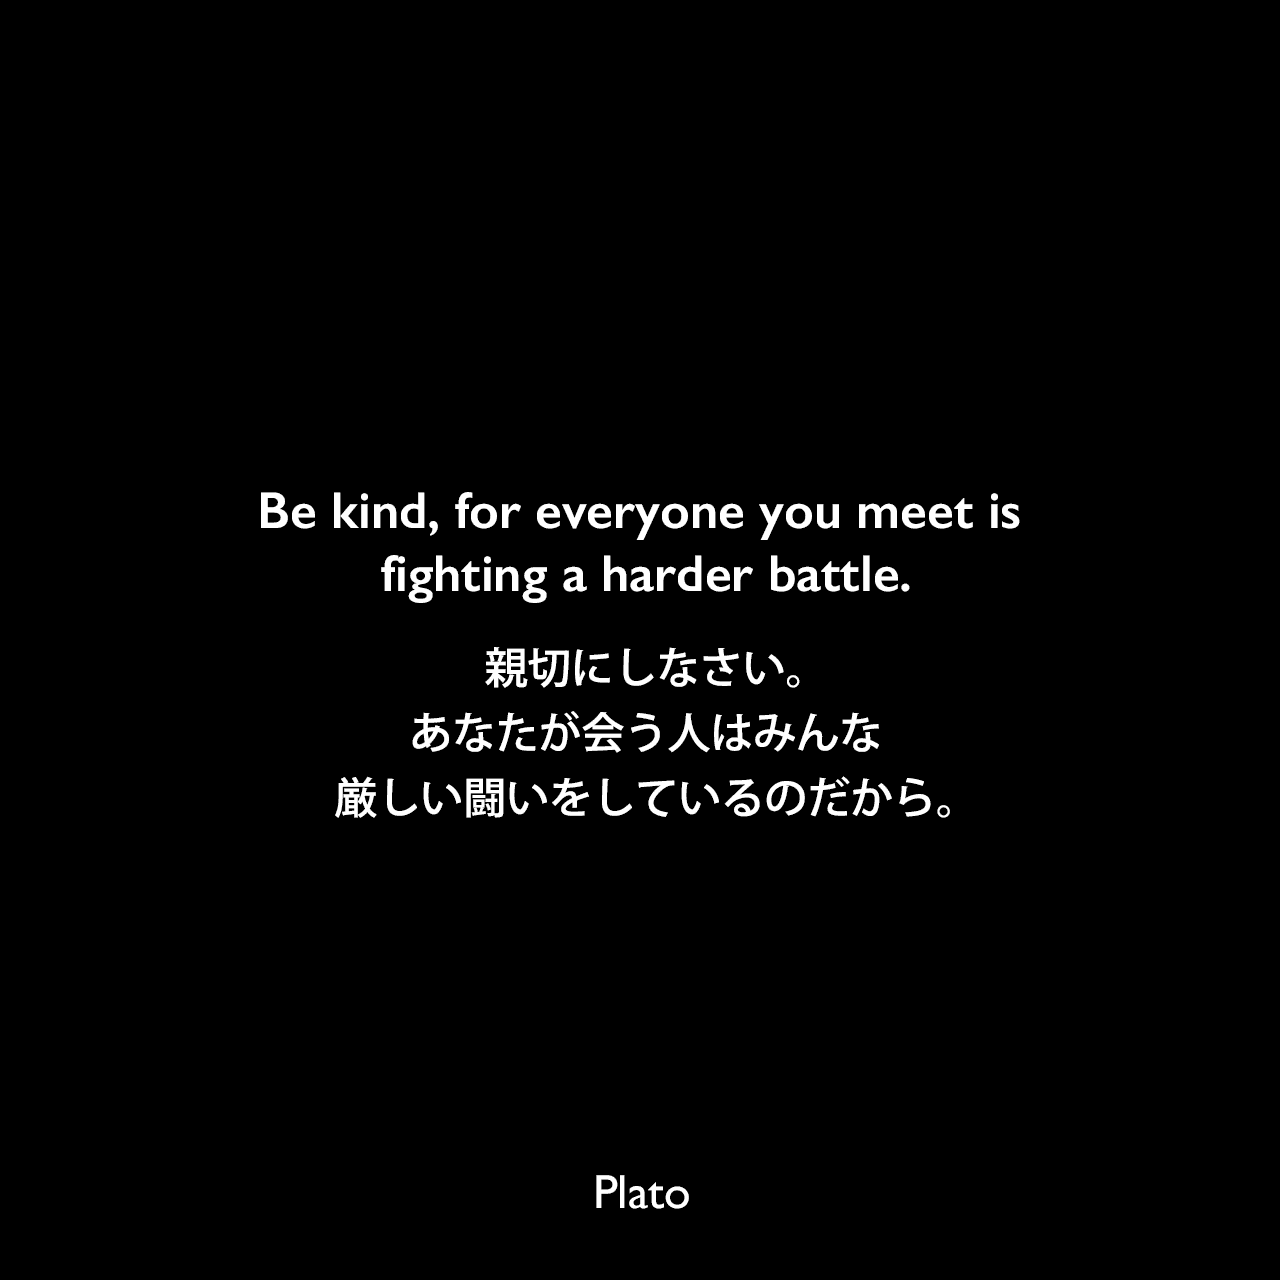 Be kind, for everyone you meet is fighting a harder battle.親切にしなさい。あなたが会う人はみんな、厳しい闘いをしているのだから。